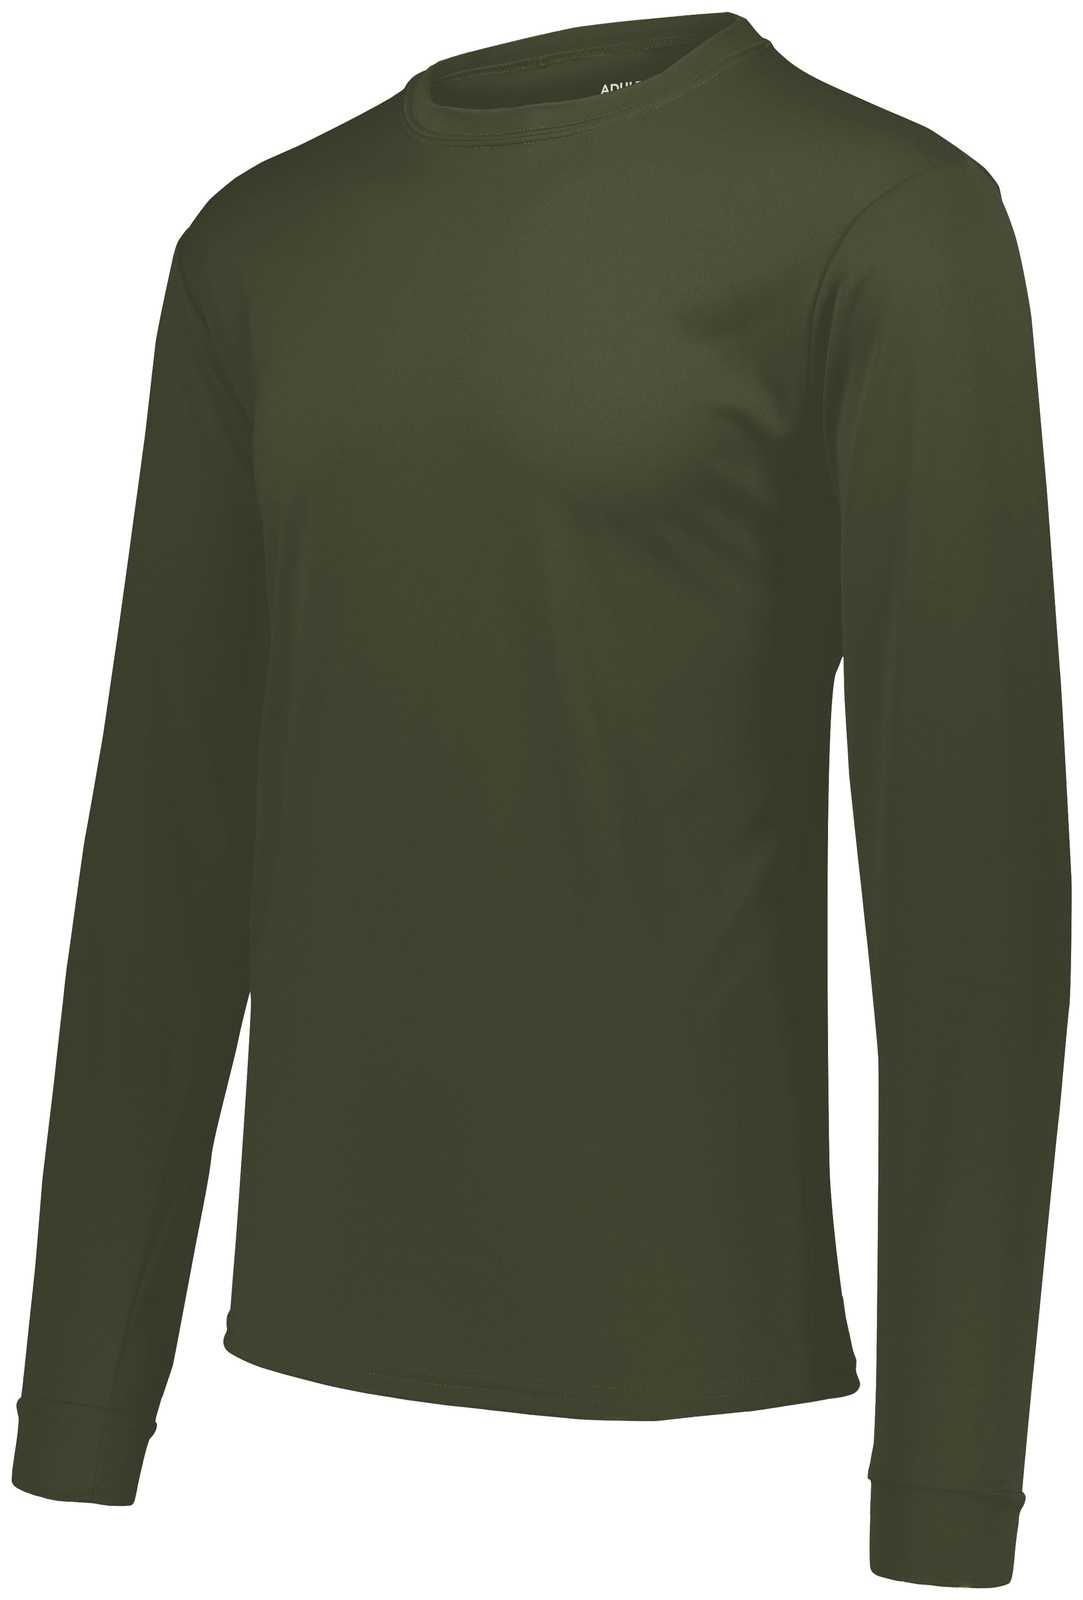 Augusta 788 NexGen Wicking Long Sleeve Tee - Olive - HIT a Double